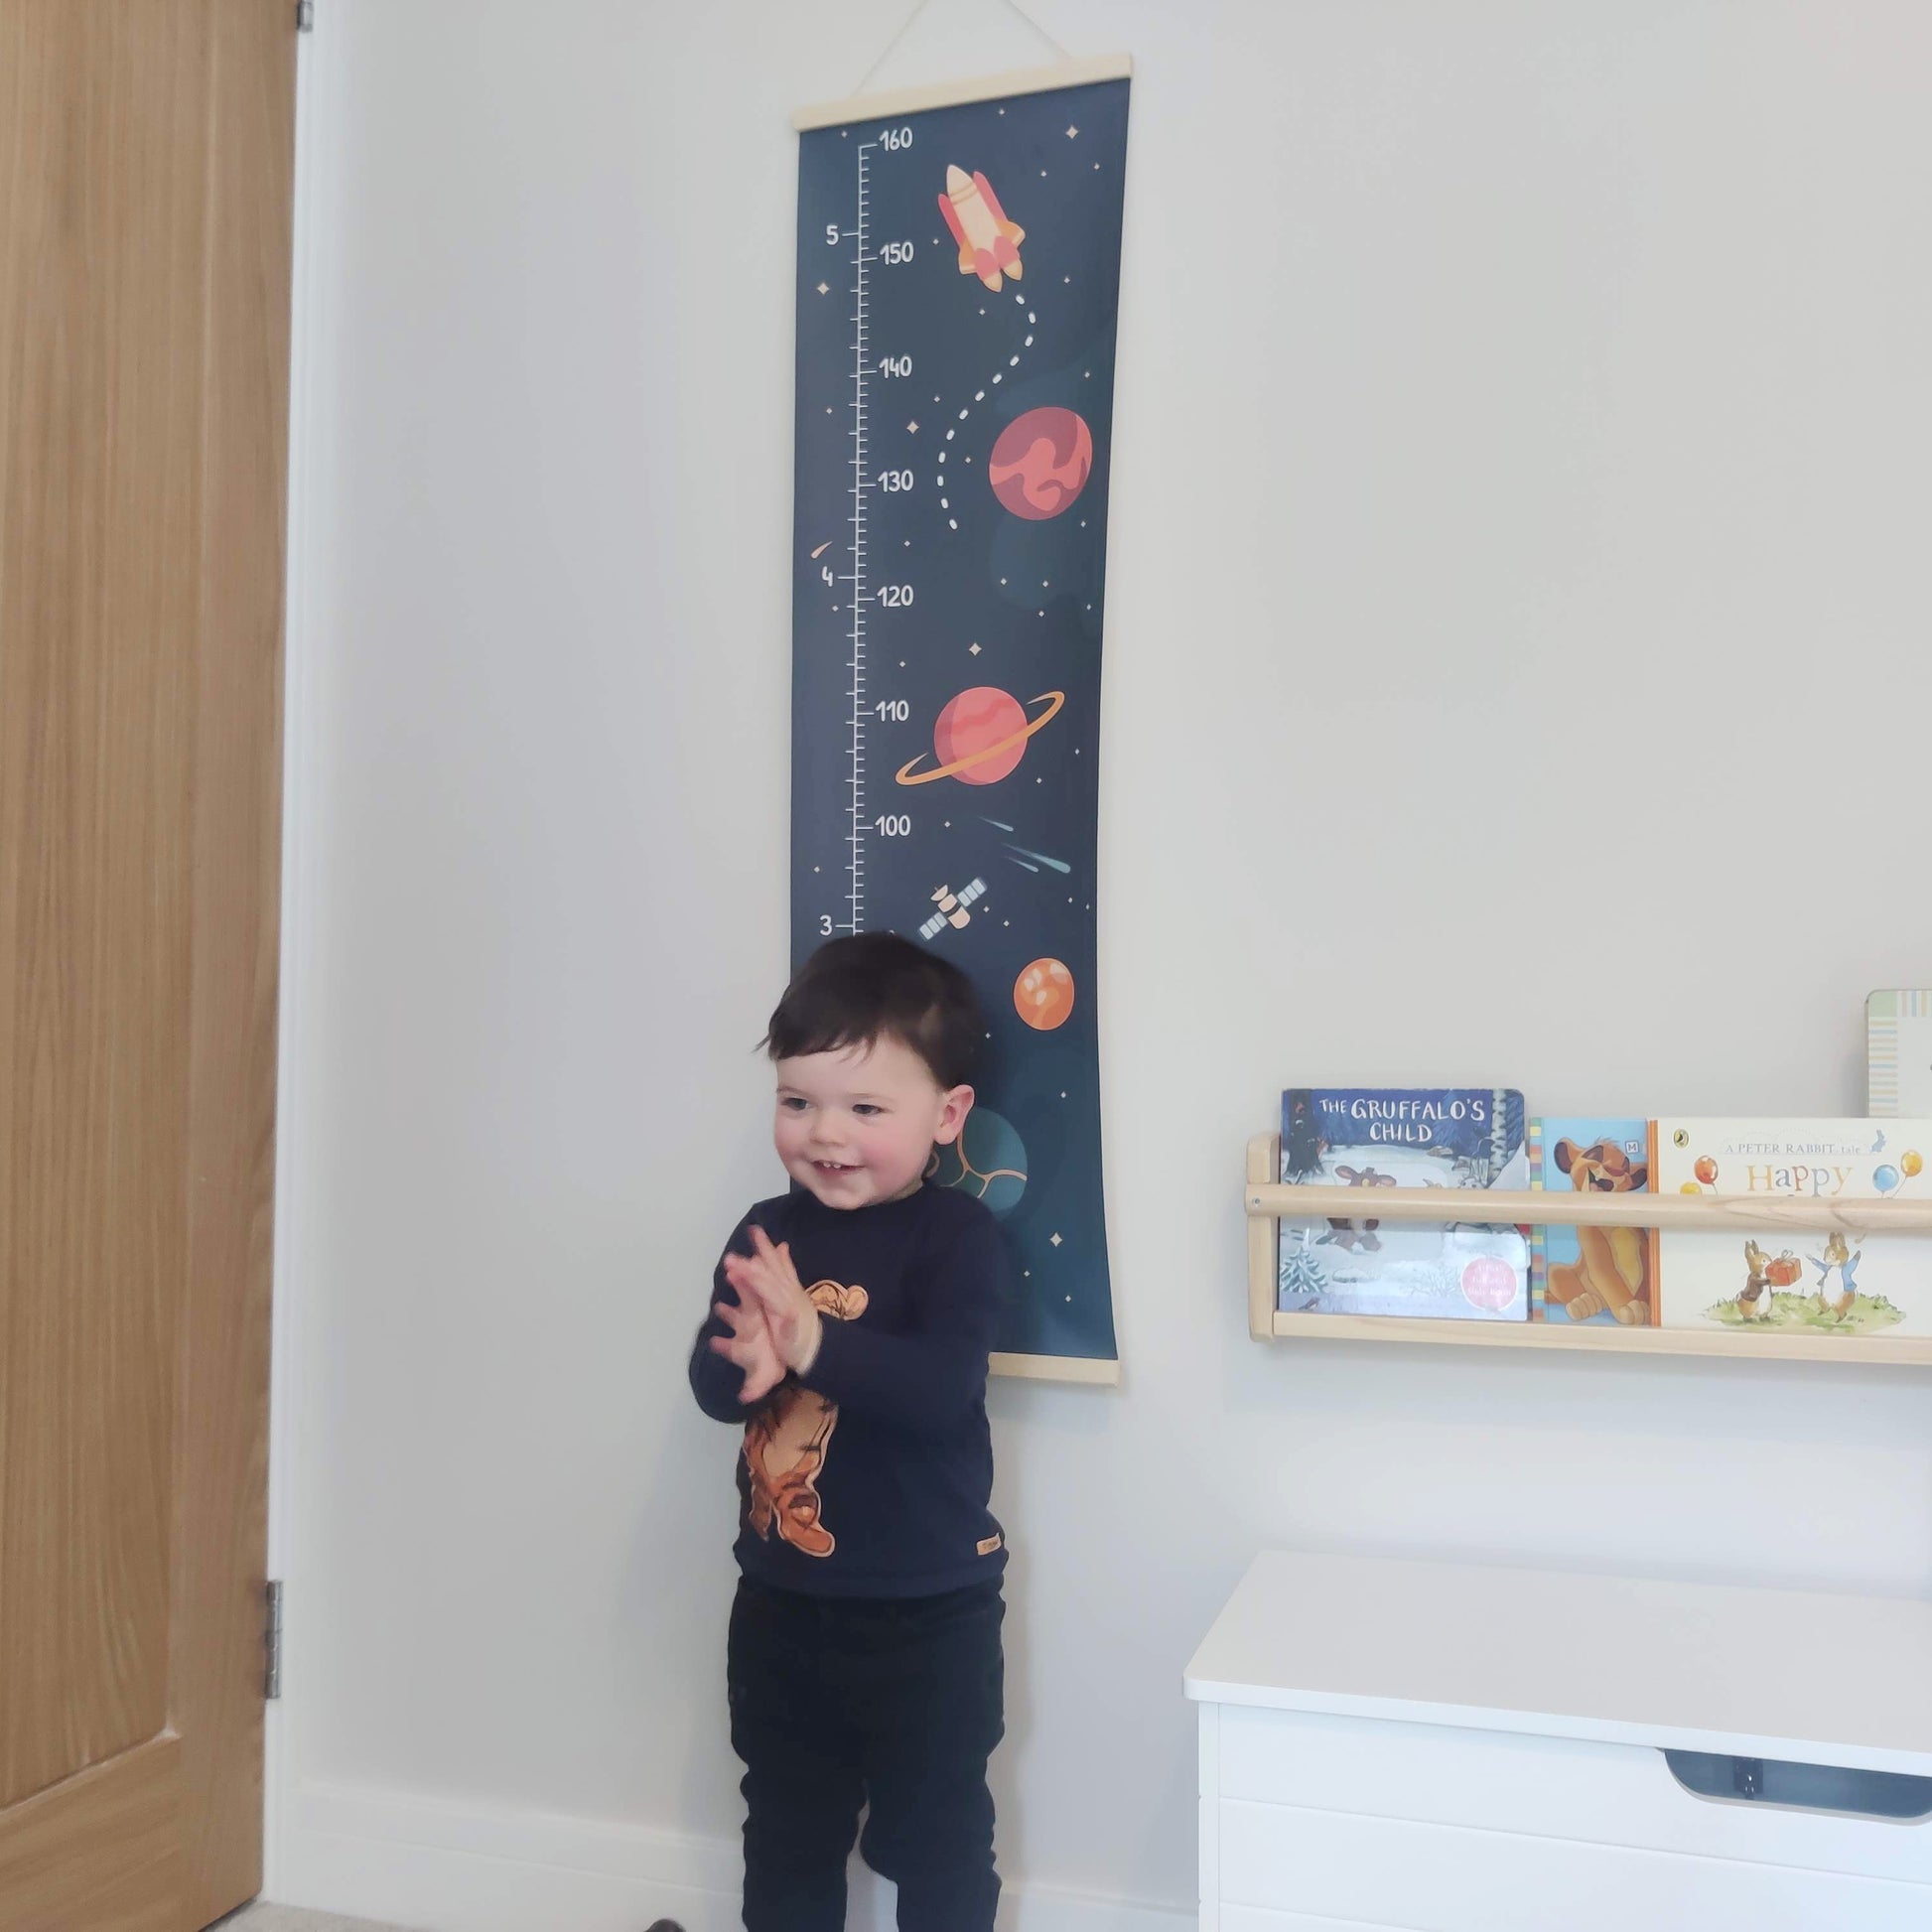 Heightchart with planets and rocket illustration in a space theme with young boy stood in front clapping his hands